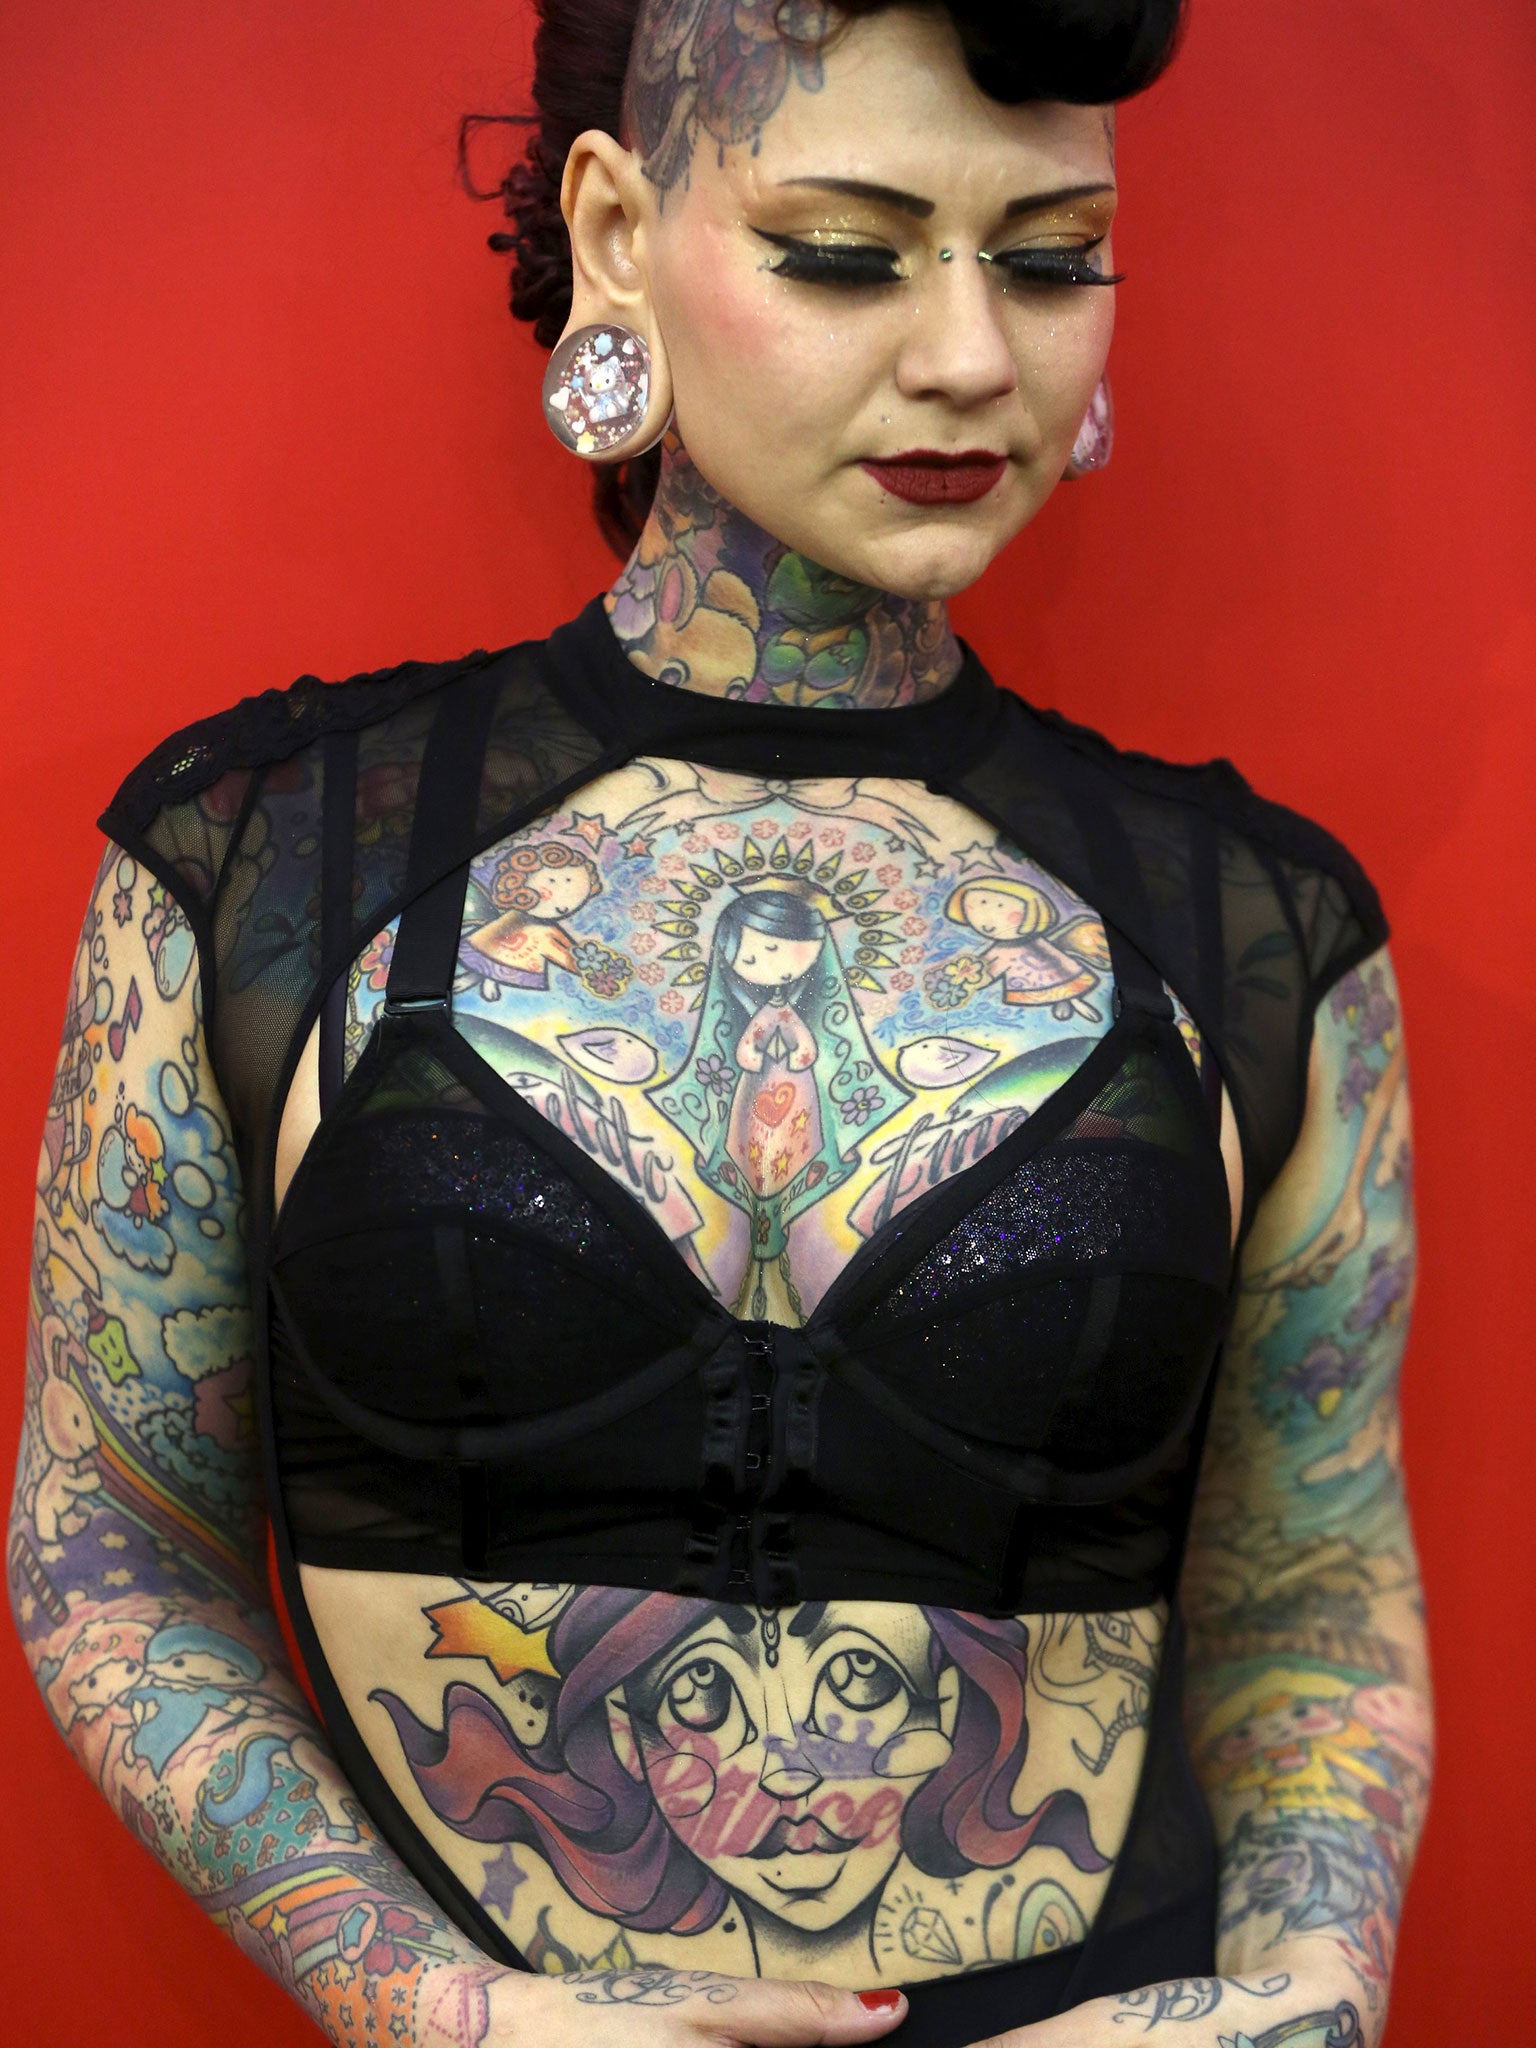 From Game Of Thrones To Burlesque The Most Stunning Ink At This Year